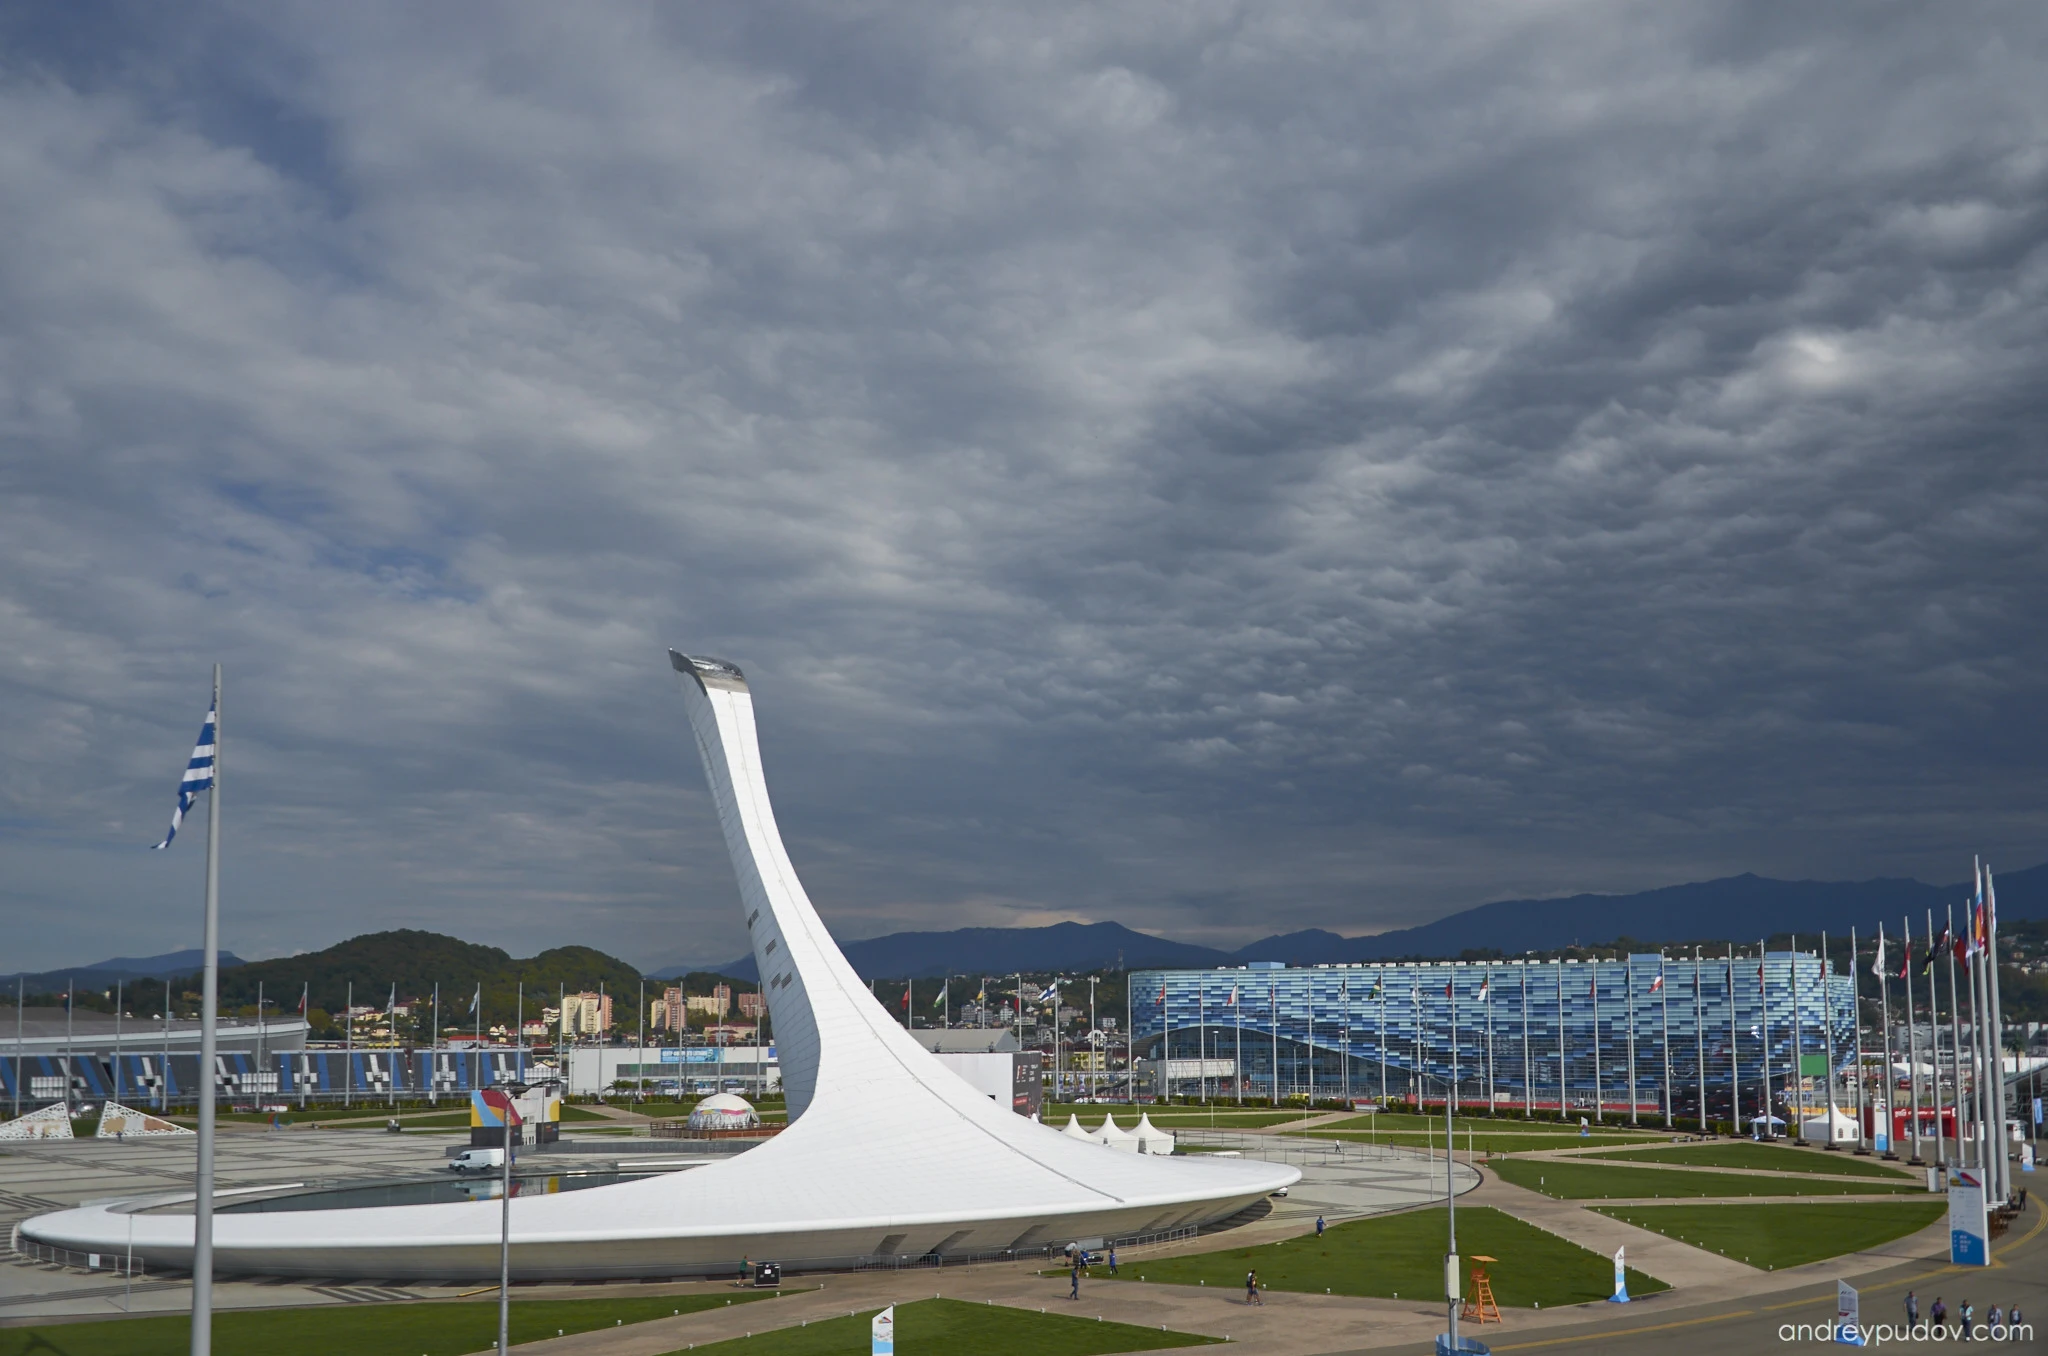 Sochi Medals Plaza

Centrally located within the Sochi Olympic Park sports venues, the Sochi Medals Plaza is located near the Fisht Olympic Stadium, the Black Sea coast, and was the cauldron for the Olympic Flame. It is surrounded by a large water basin.

Every night, the medals of the 2014 Winter Olympics were awarded there. The stage will remain with legacy footsteps on it which will permanently record the names of all the medal winners. During the Olympics, the venue temporarily could accommodate 20,000 standing spectators.

The plaza now shapes corners 2-5 of the Sochi Autodrom motor-racing circuit. The entire circuit snakes around other structures in the Sochi Olympic Park.